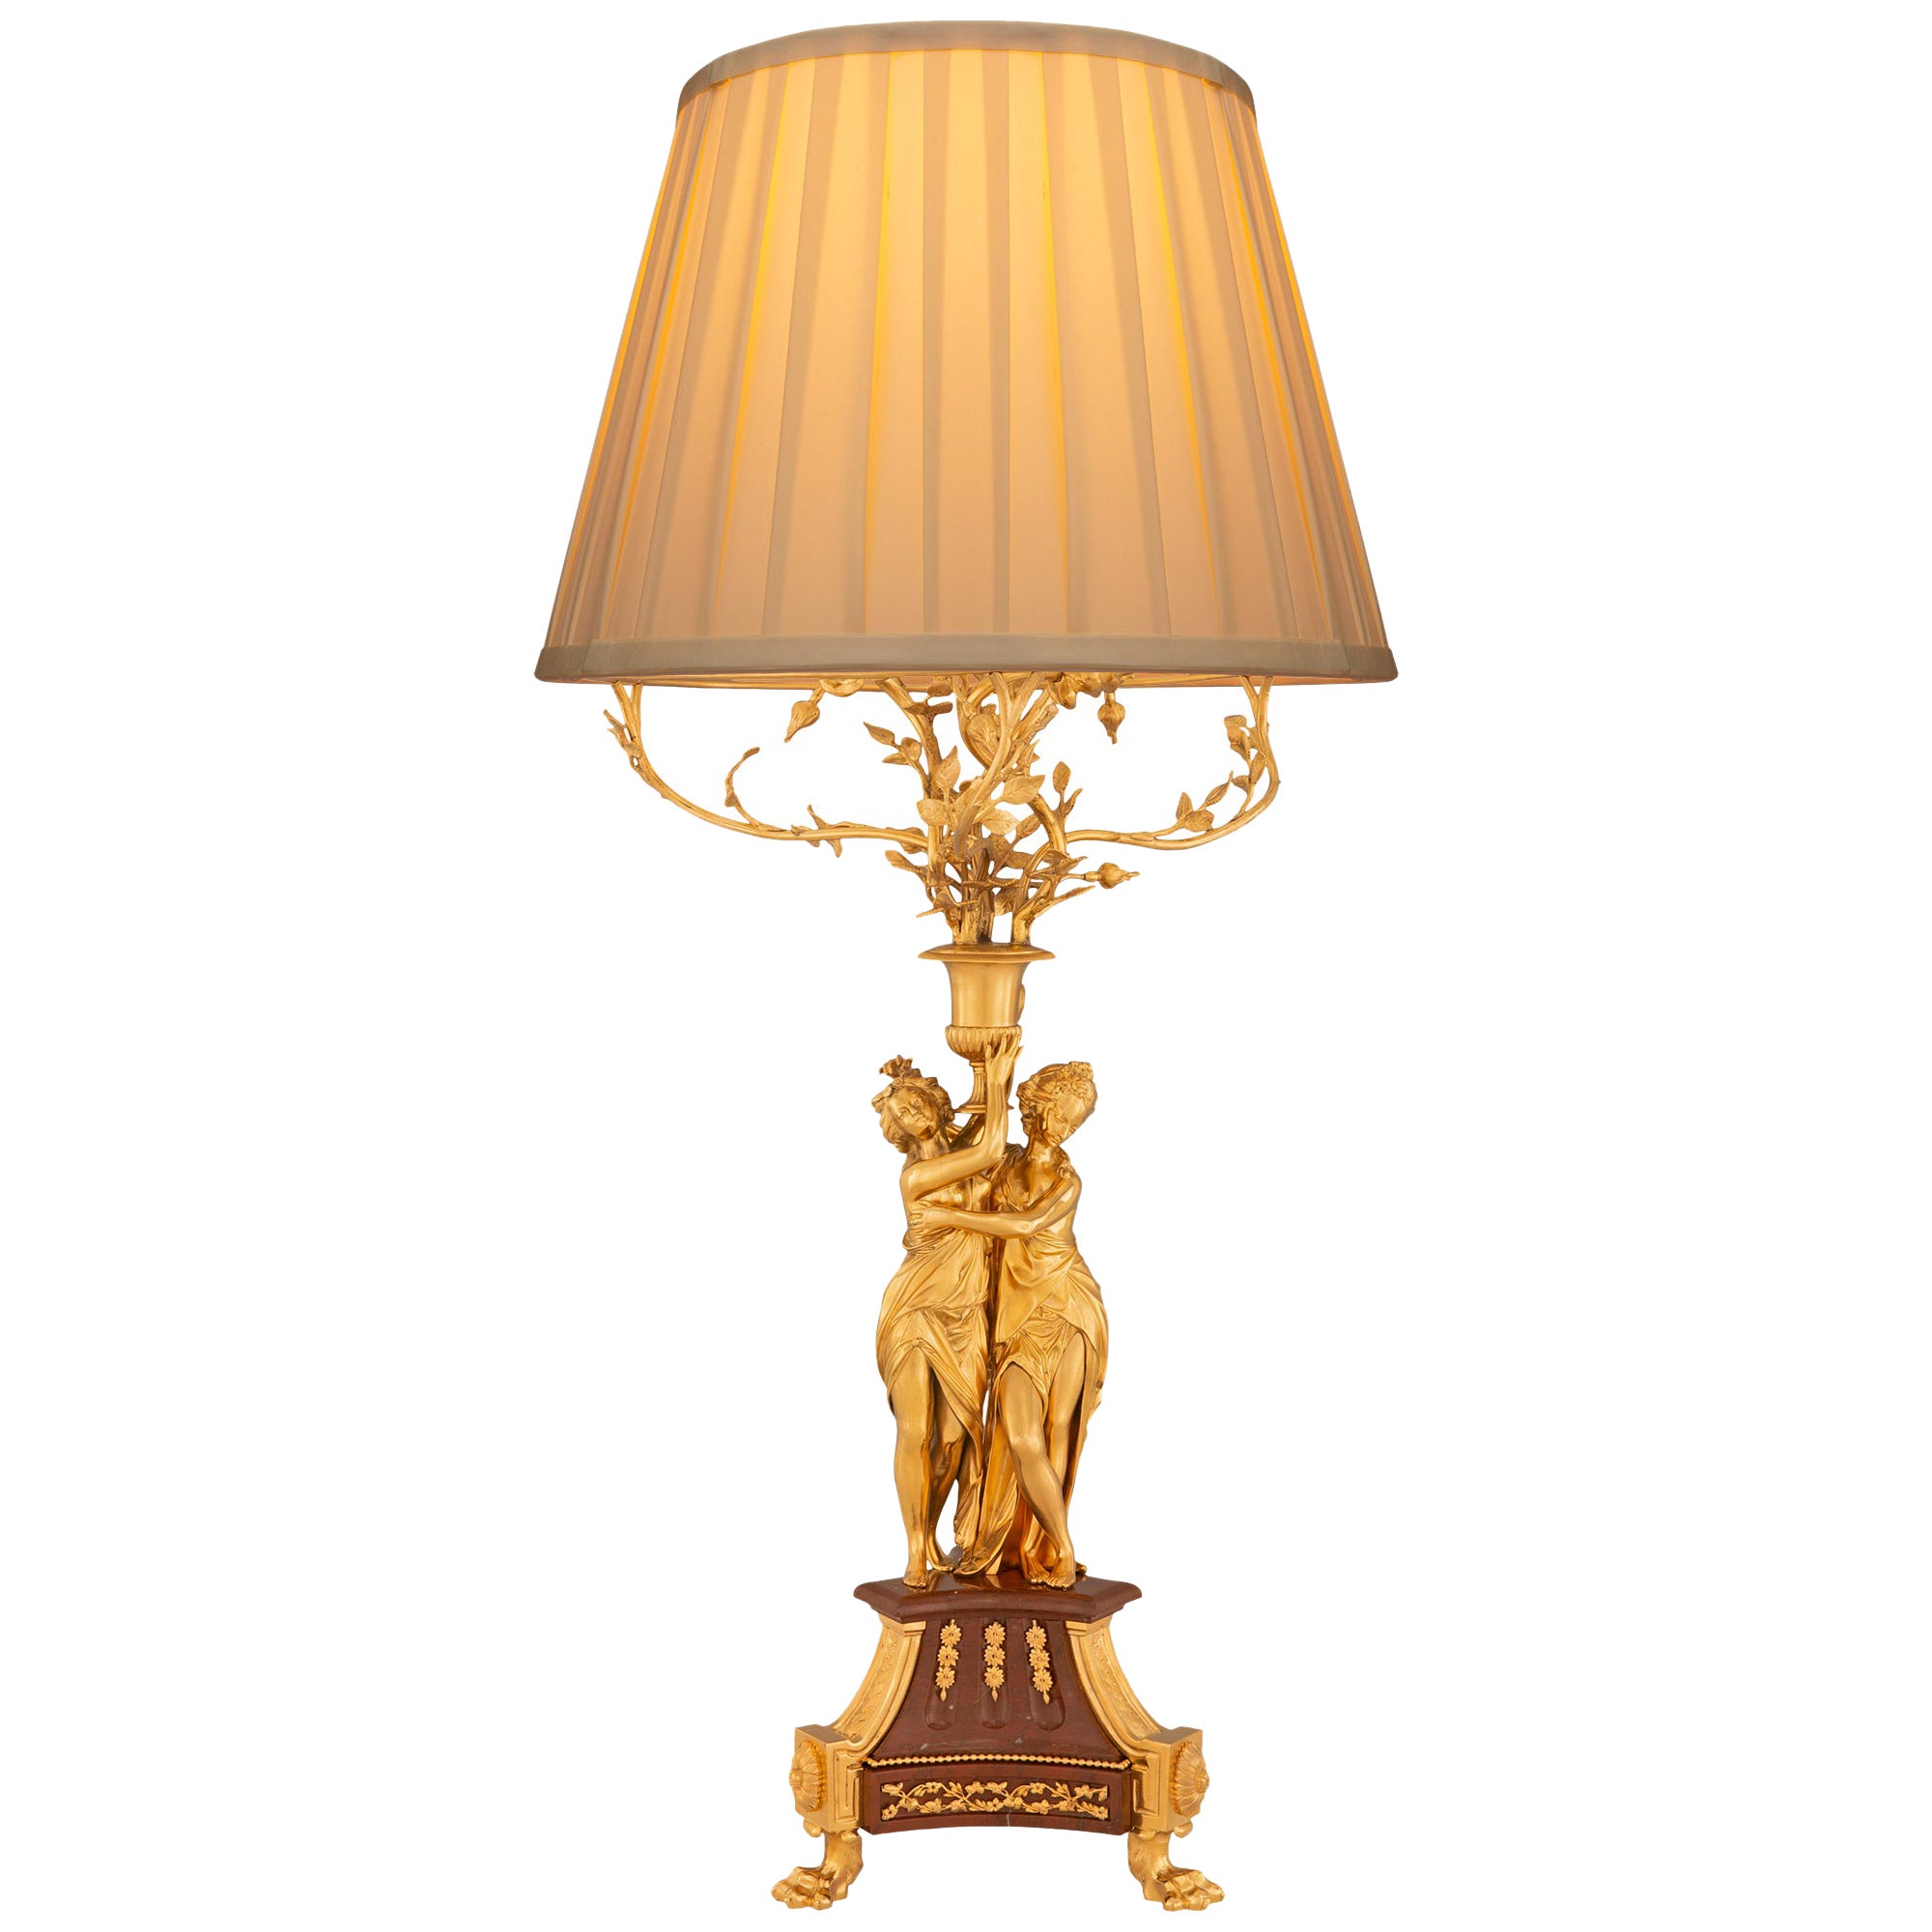 French 19th Century Belle Époque Period Ormolu And Rouge Griotte Marble Lamp For Sale